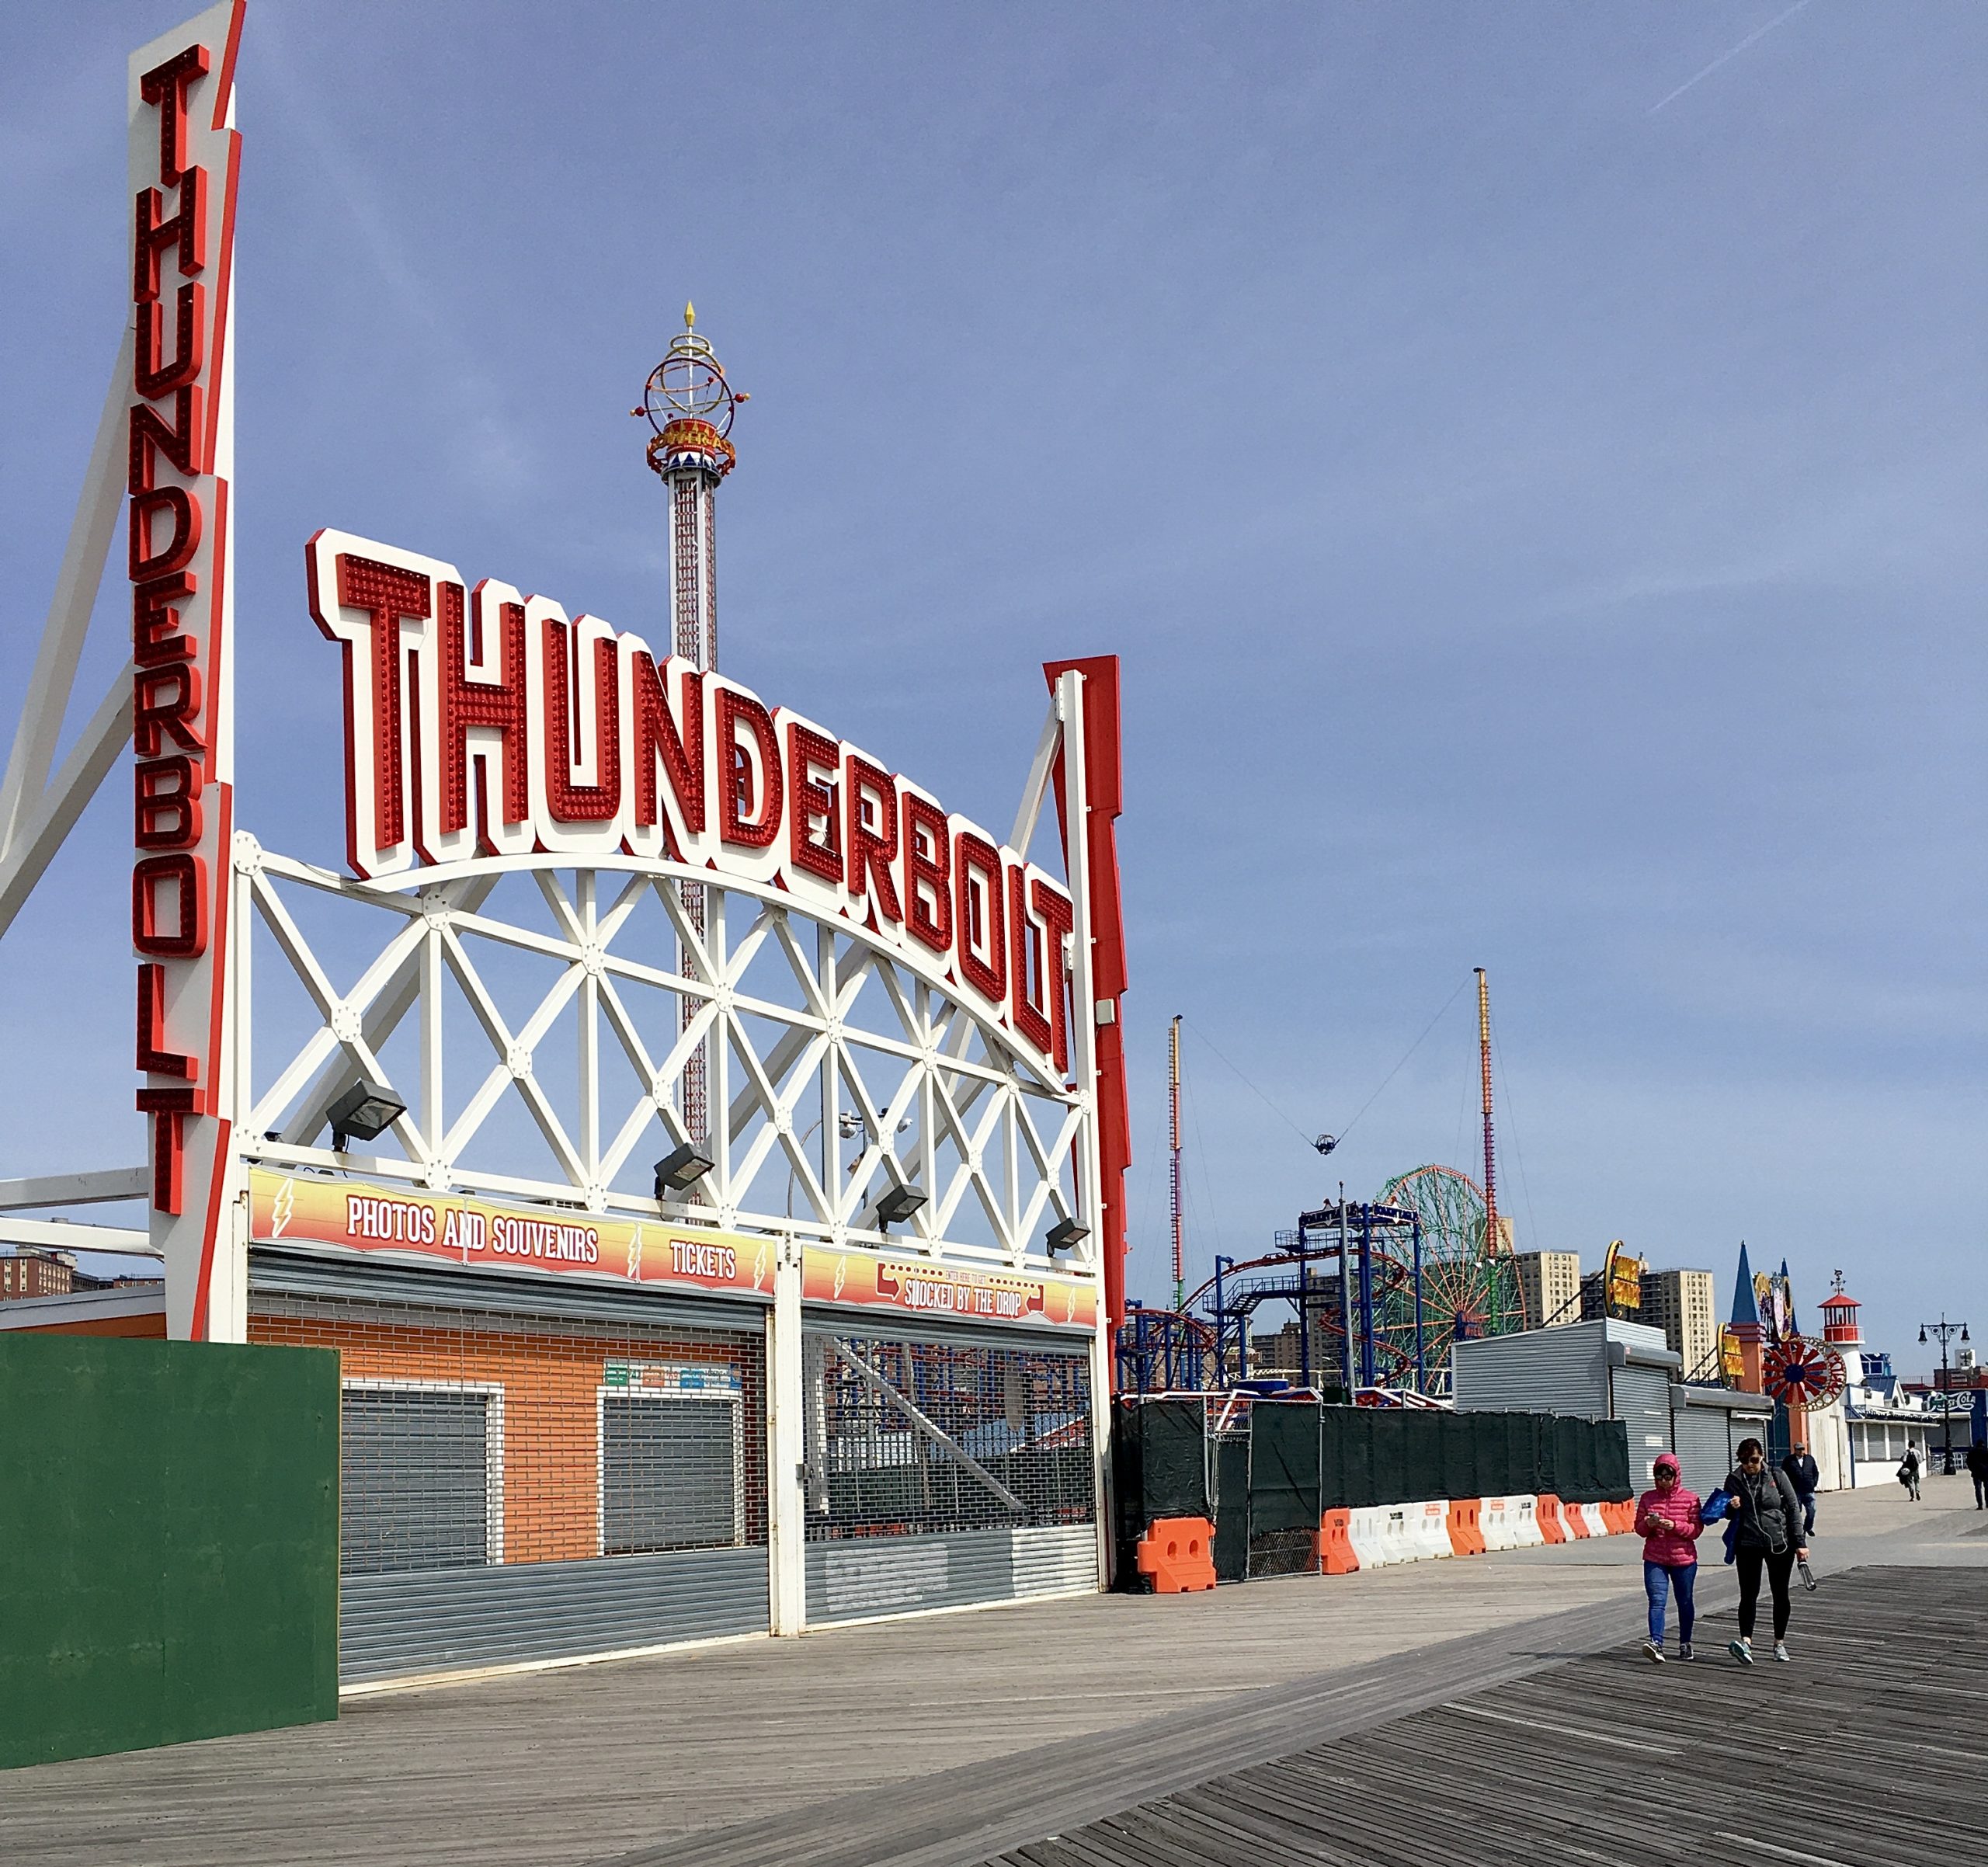  Here’s the entrance to the Thunderbolt. Photo: Lore Croghan/Brooklyn Eagle